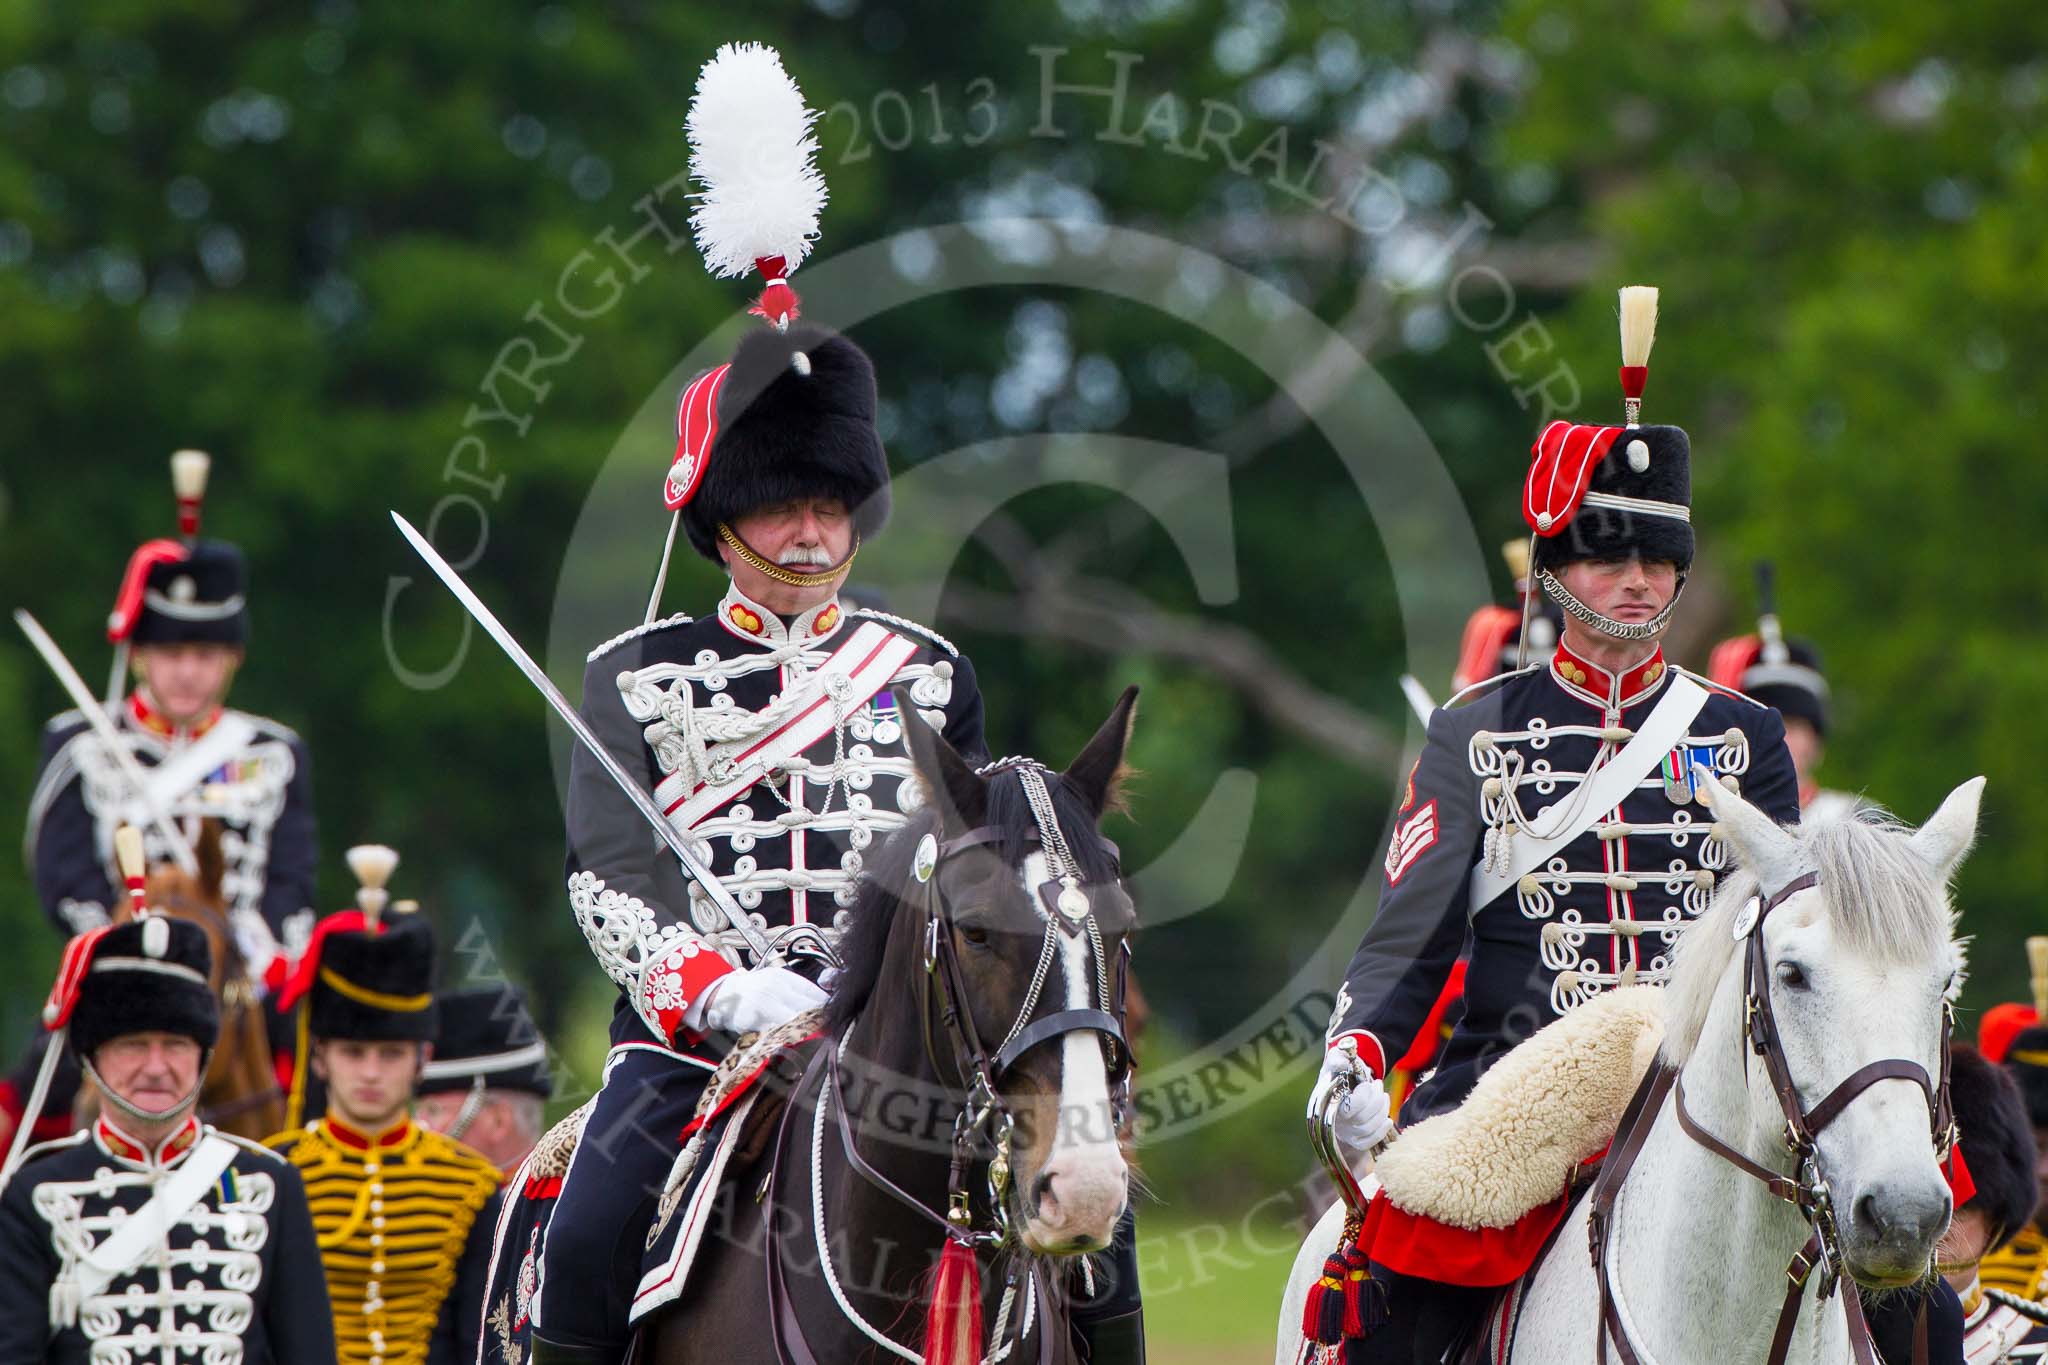 The Light Cavalry HAC Annual Review and Inspection 2013.
Windsor Great Park Review Ground,
Windsor,
Berkshire,
United Kingdom,
on 09 June 2013 at 13:14, image #332